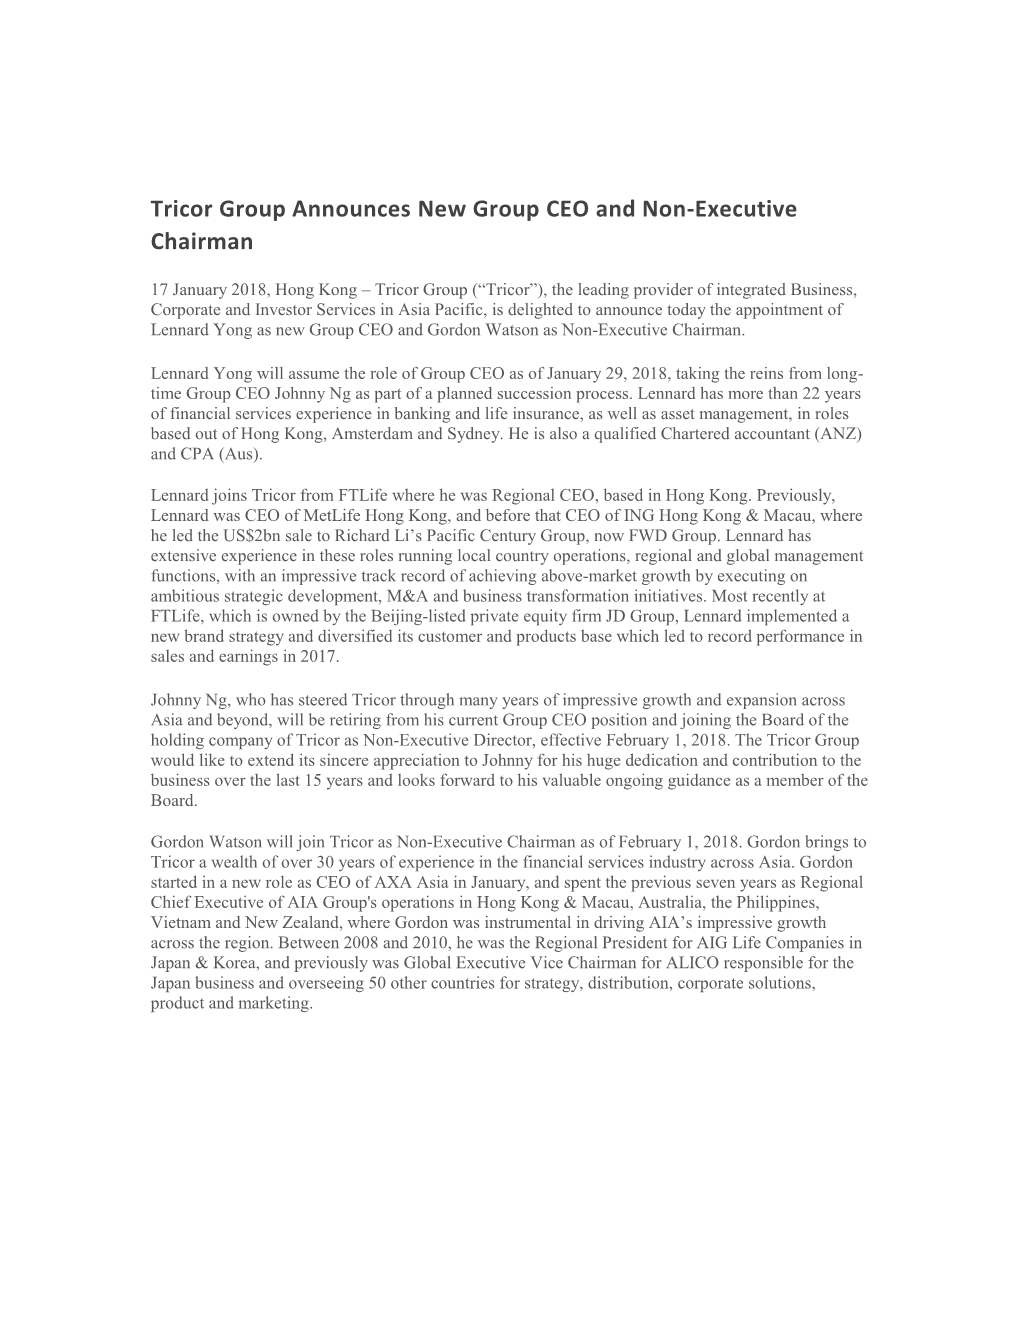 Tricor Group Announces New Group CEO and Non-Executive Chairman